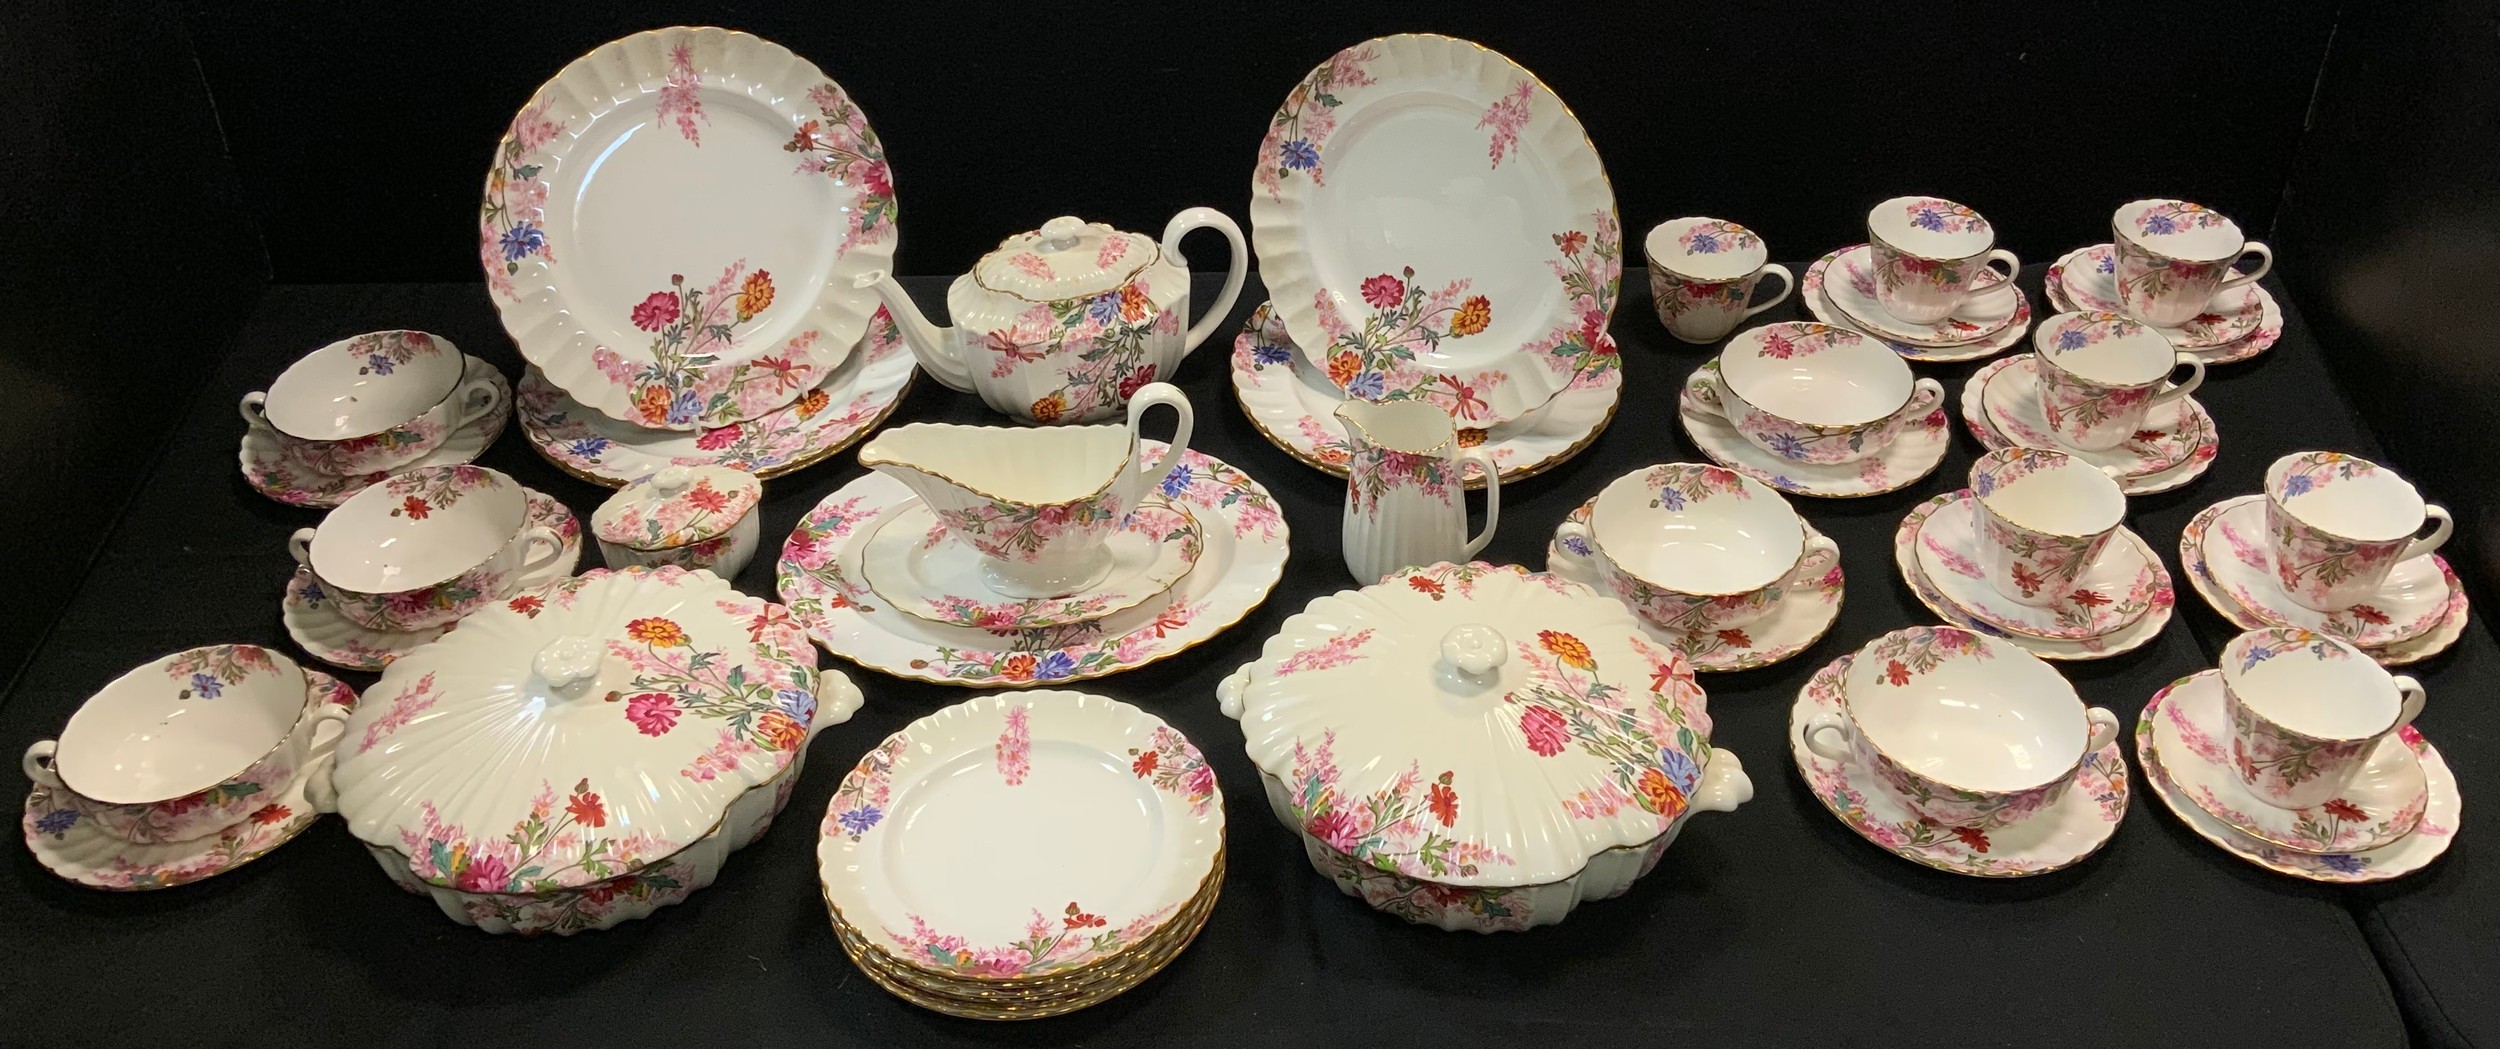 A Spode Chelsea Garden tea and dinner service, for six, comprising teacups, saucers, side plates,